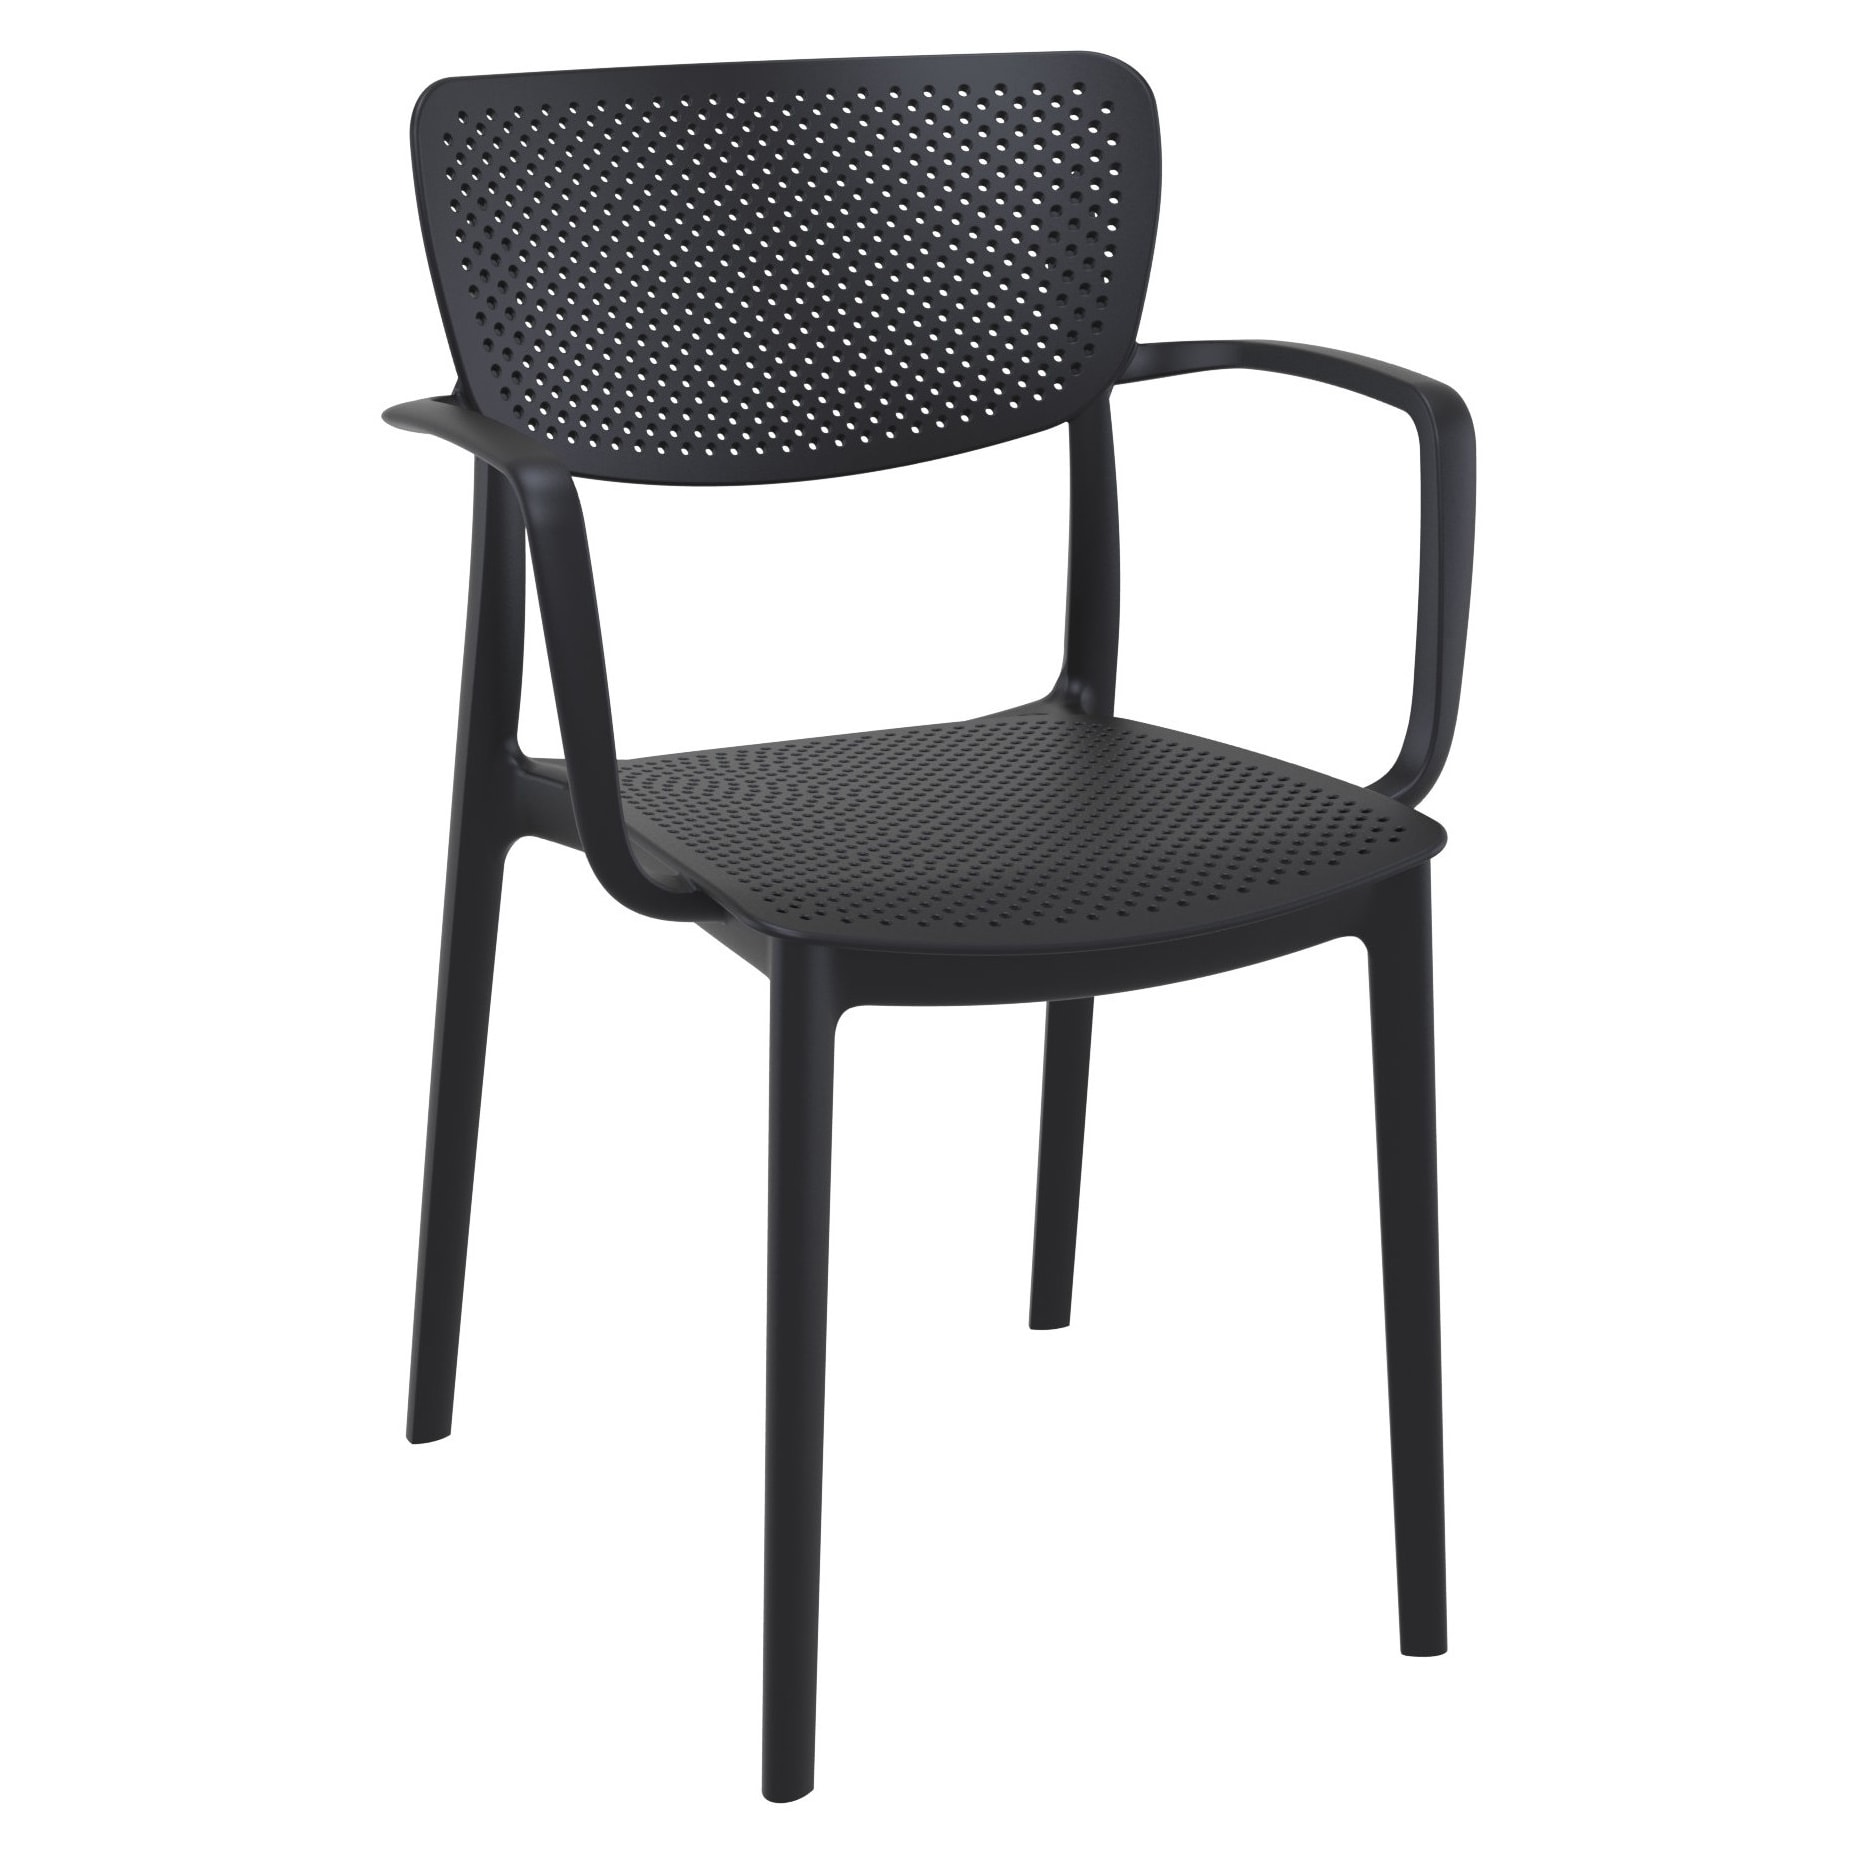 Mesh Resin Patio Arm Chair with Mesh Resin Patio Arm Chair